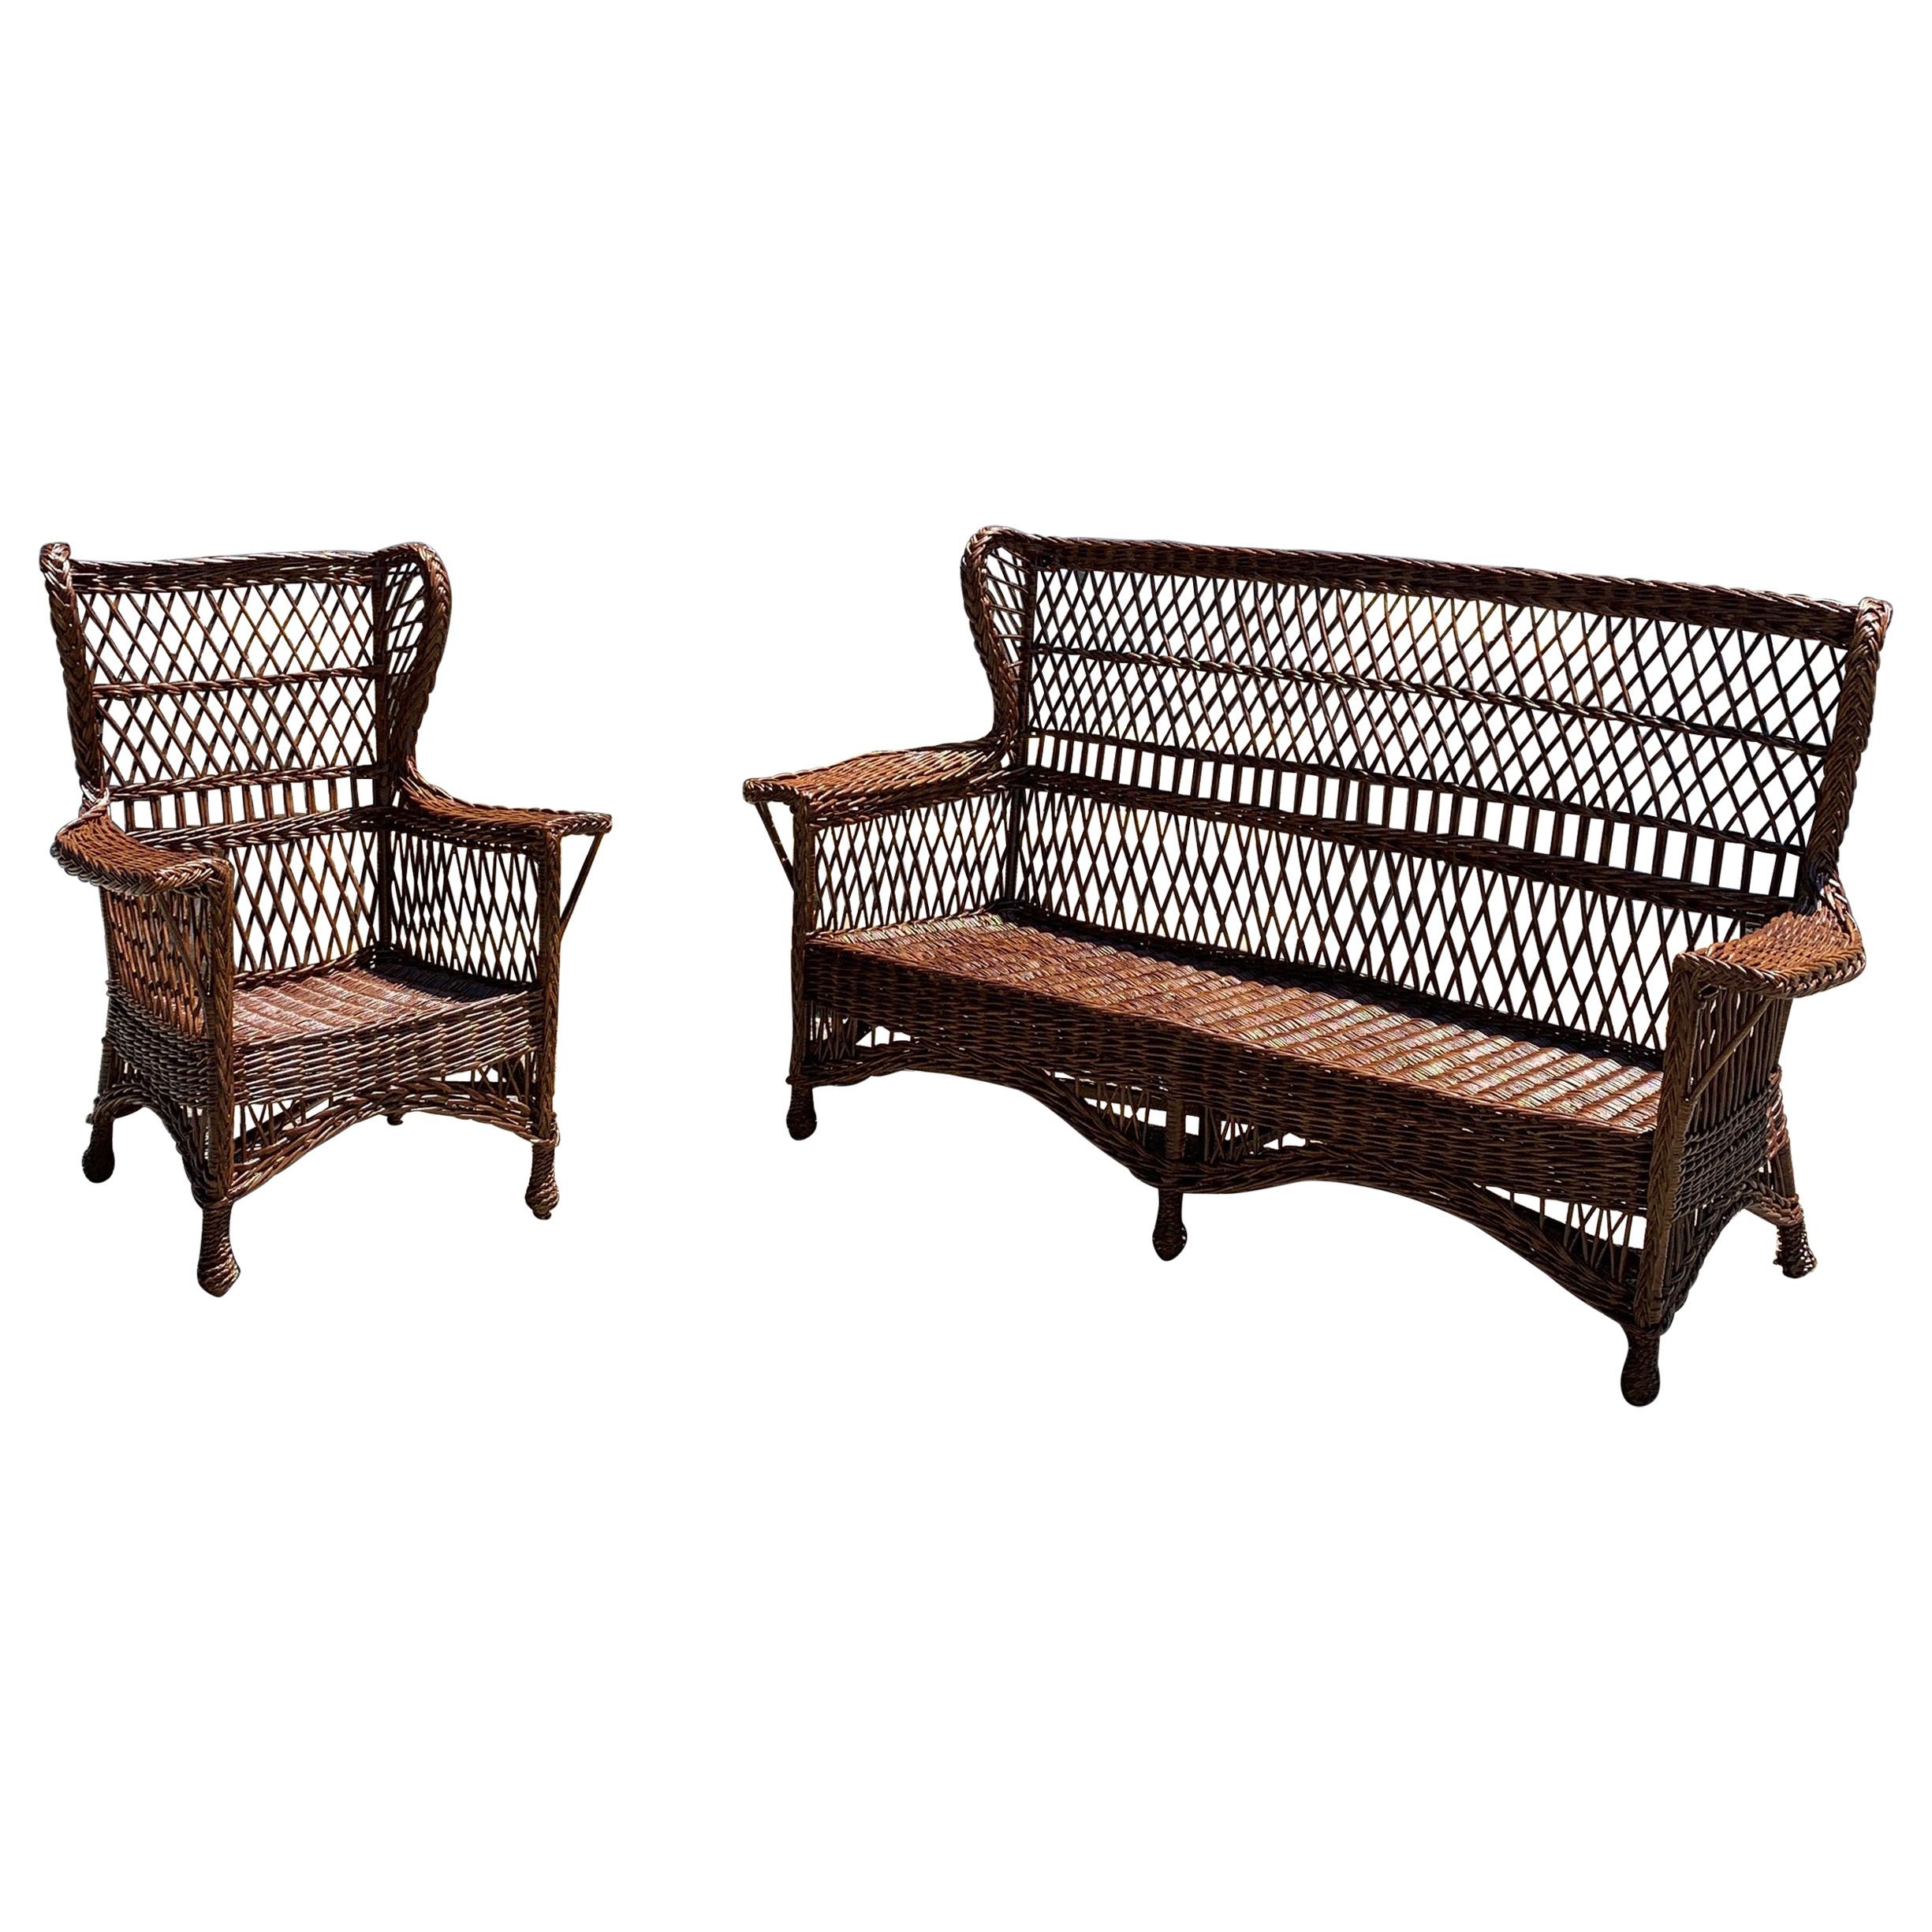 Antique Willow Wicker Sofa and Chairs  For Sale